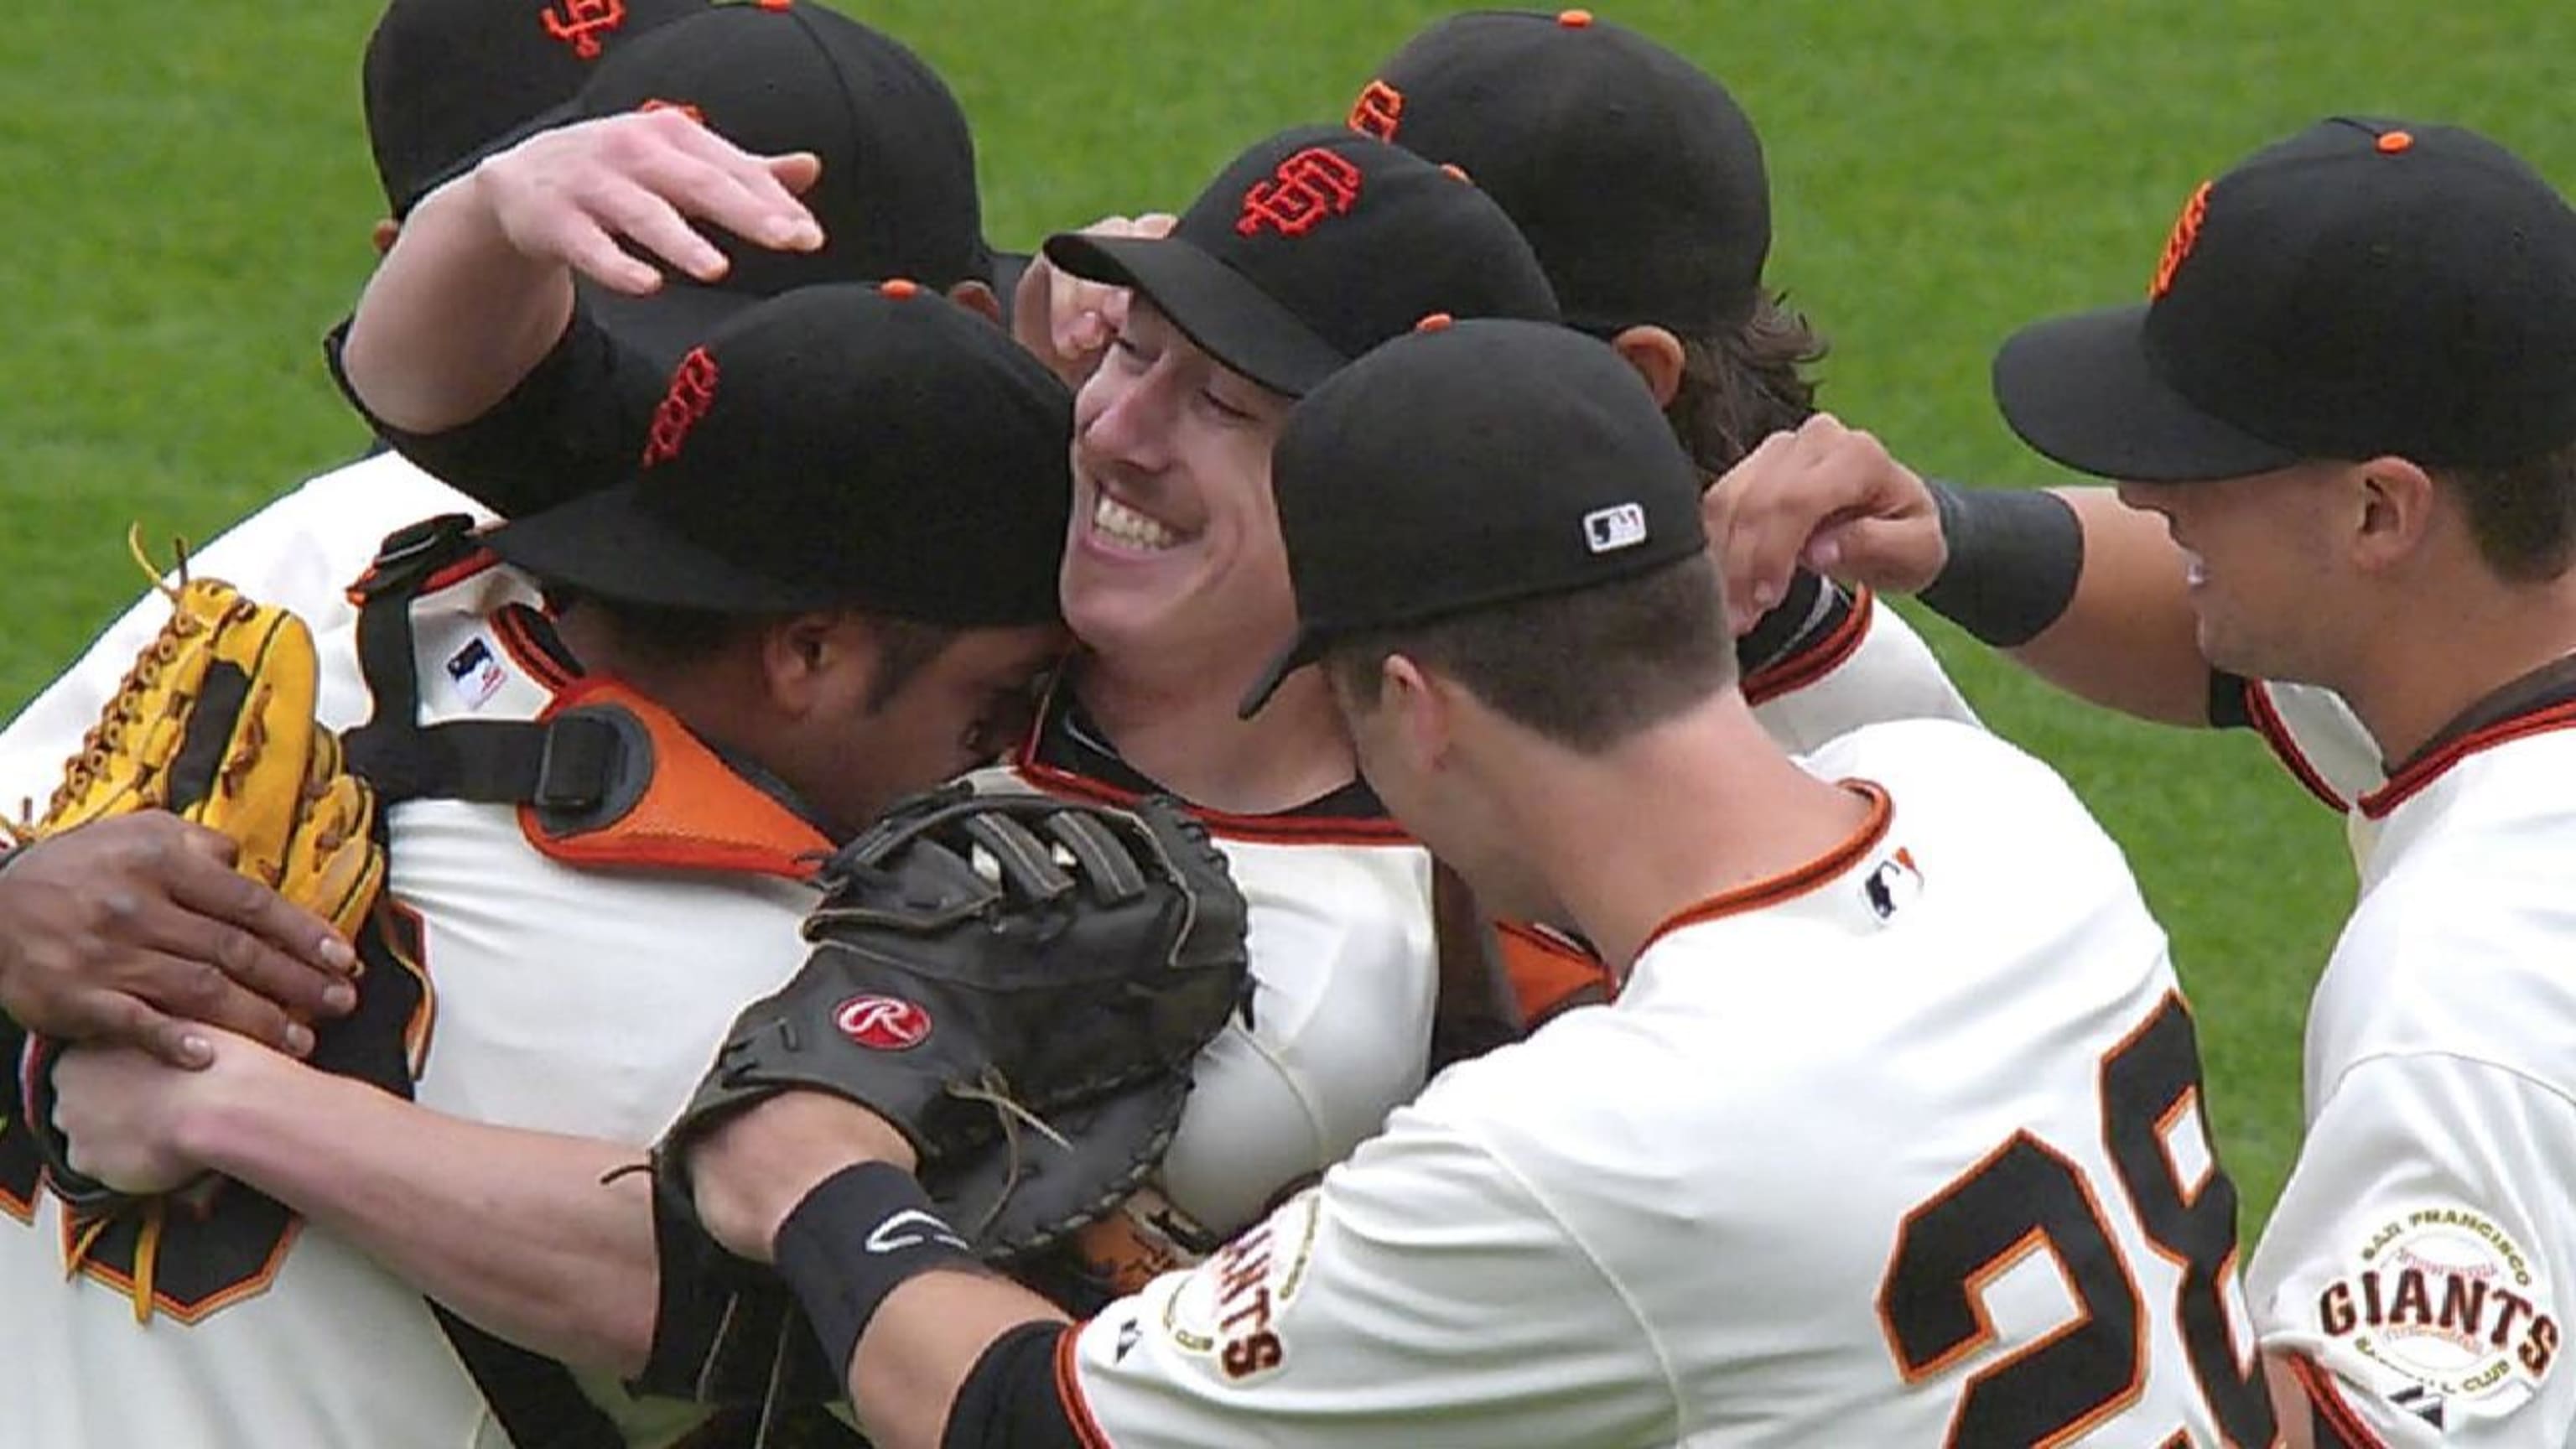 The Giants must move Tim Lincecum to the bullpen - Beyond the Box